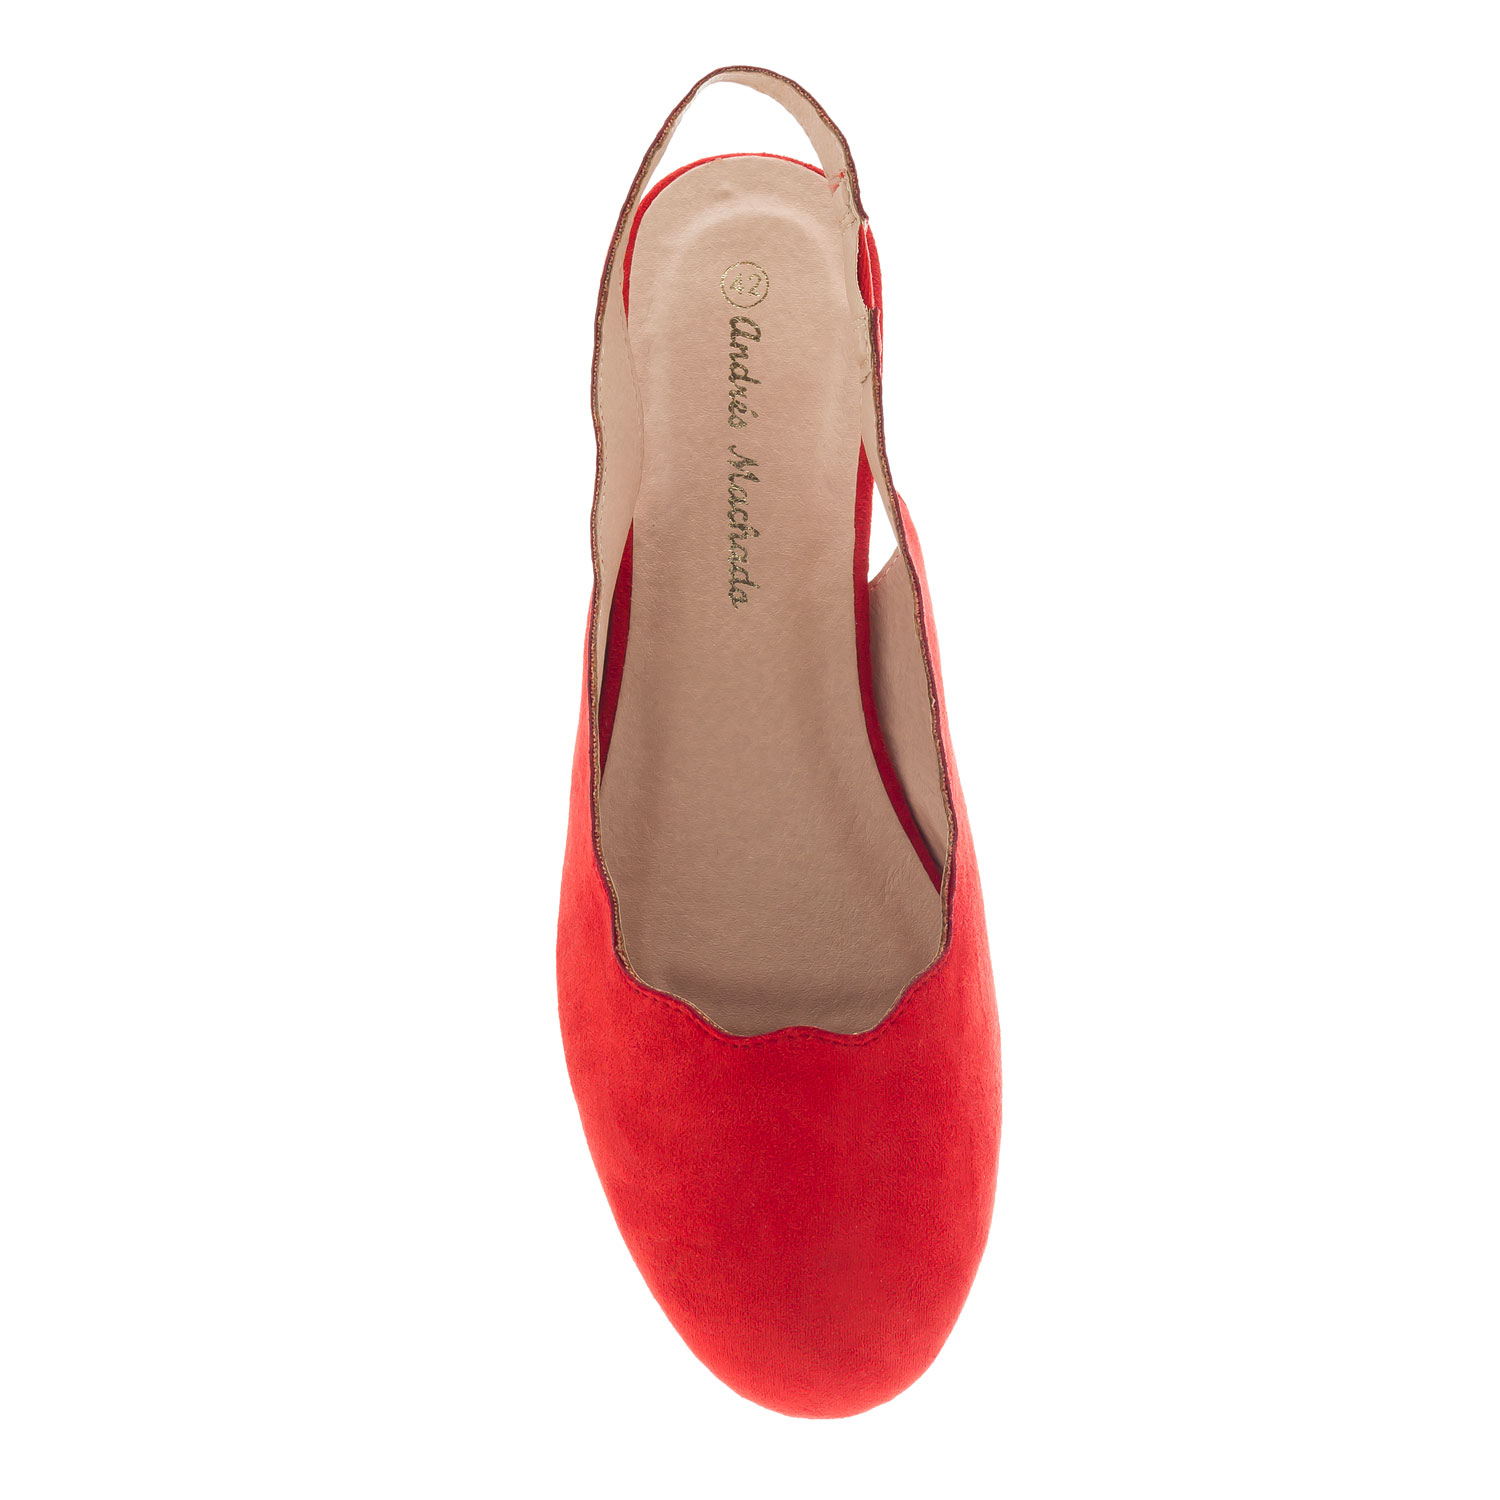 Wavy Slingback Flats in Red Suede 